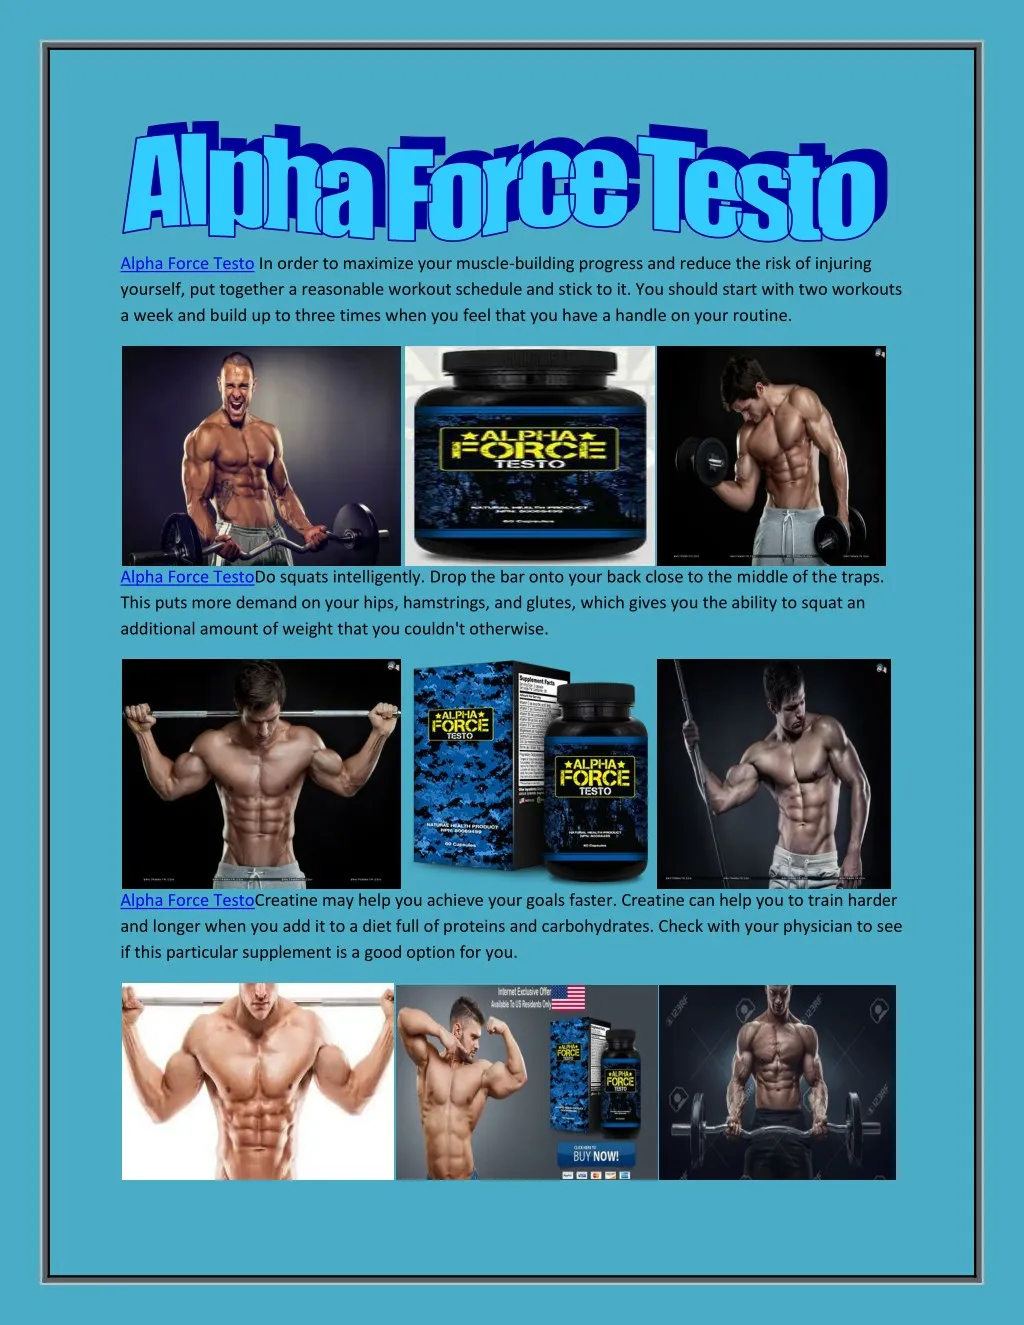 alpha force testo in order to maximize your